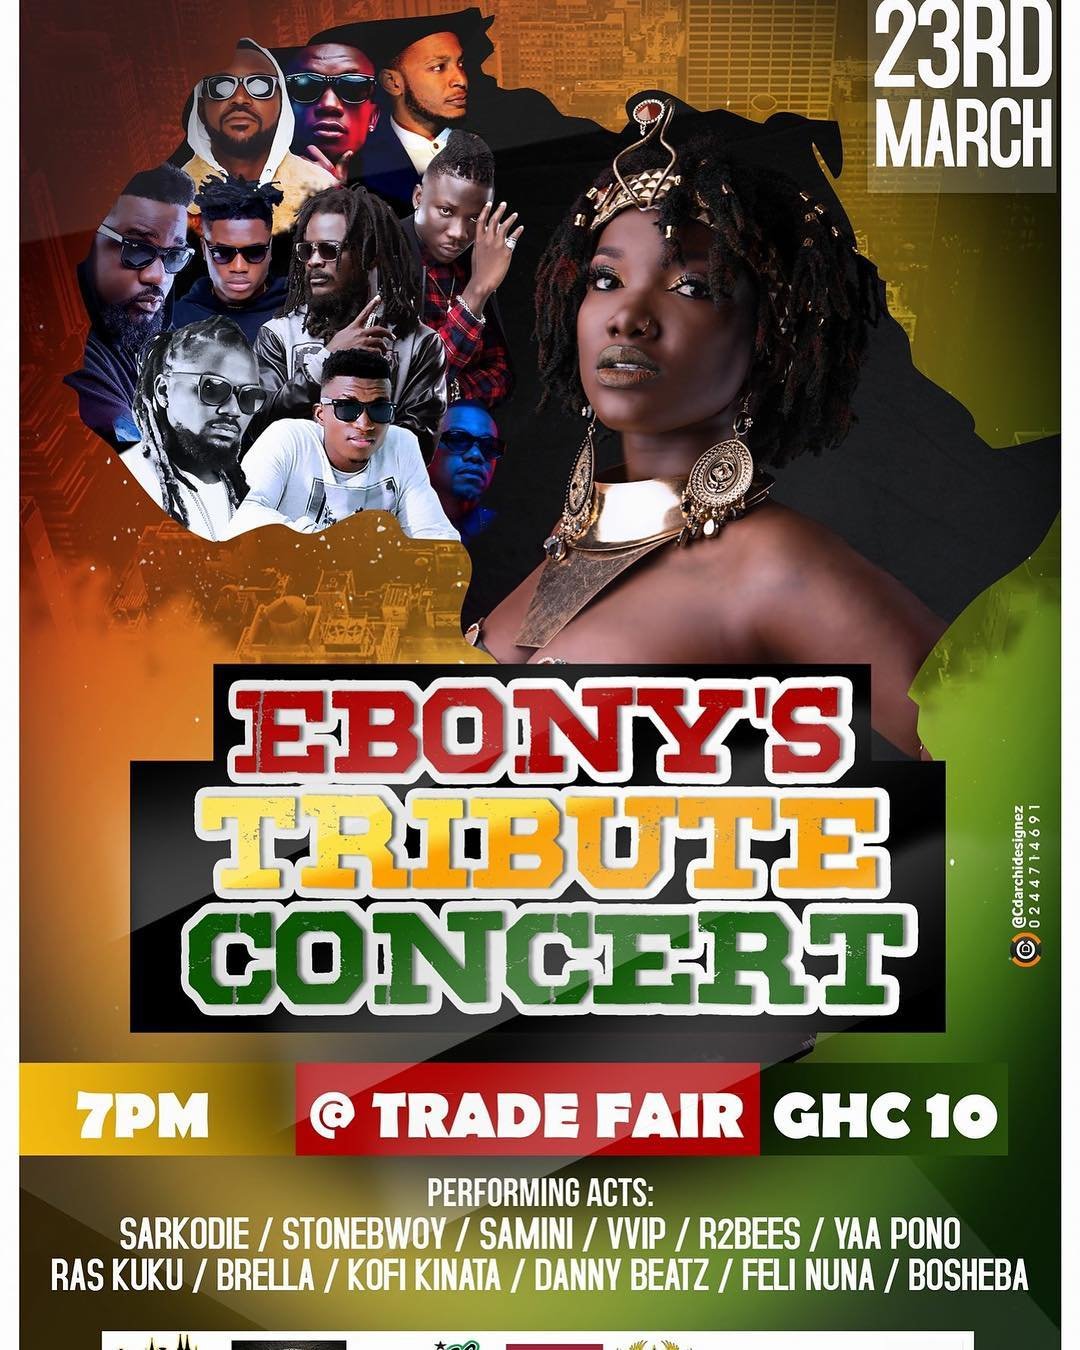 “We didn’t take a dime from Bullet to perform at Ebony’s Concert”- Edem, Epixode, DKB, Coded, Captain Planet speaks